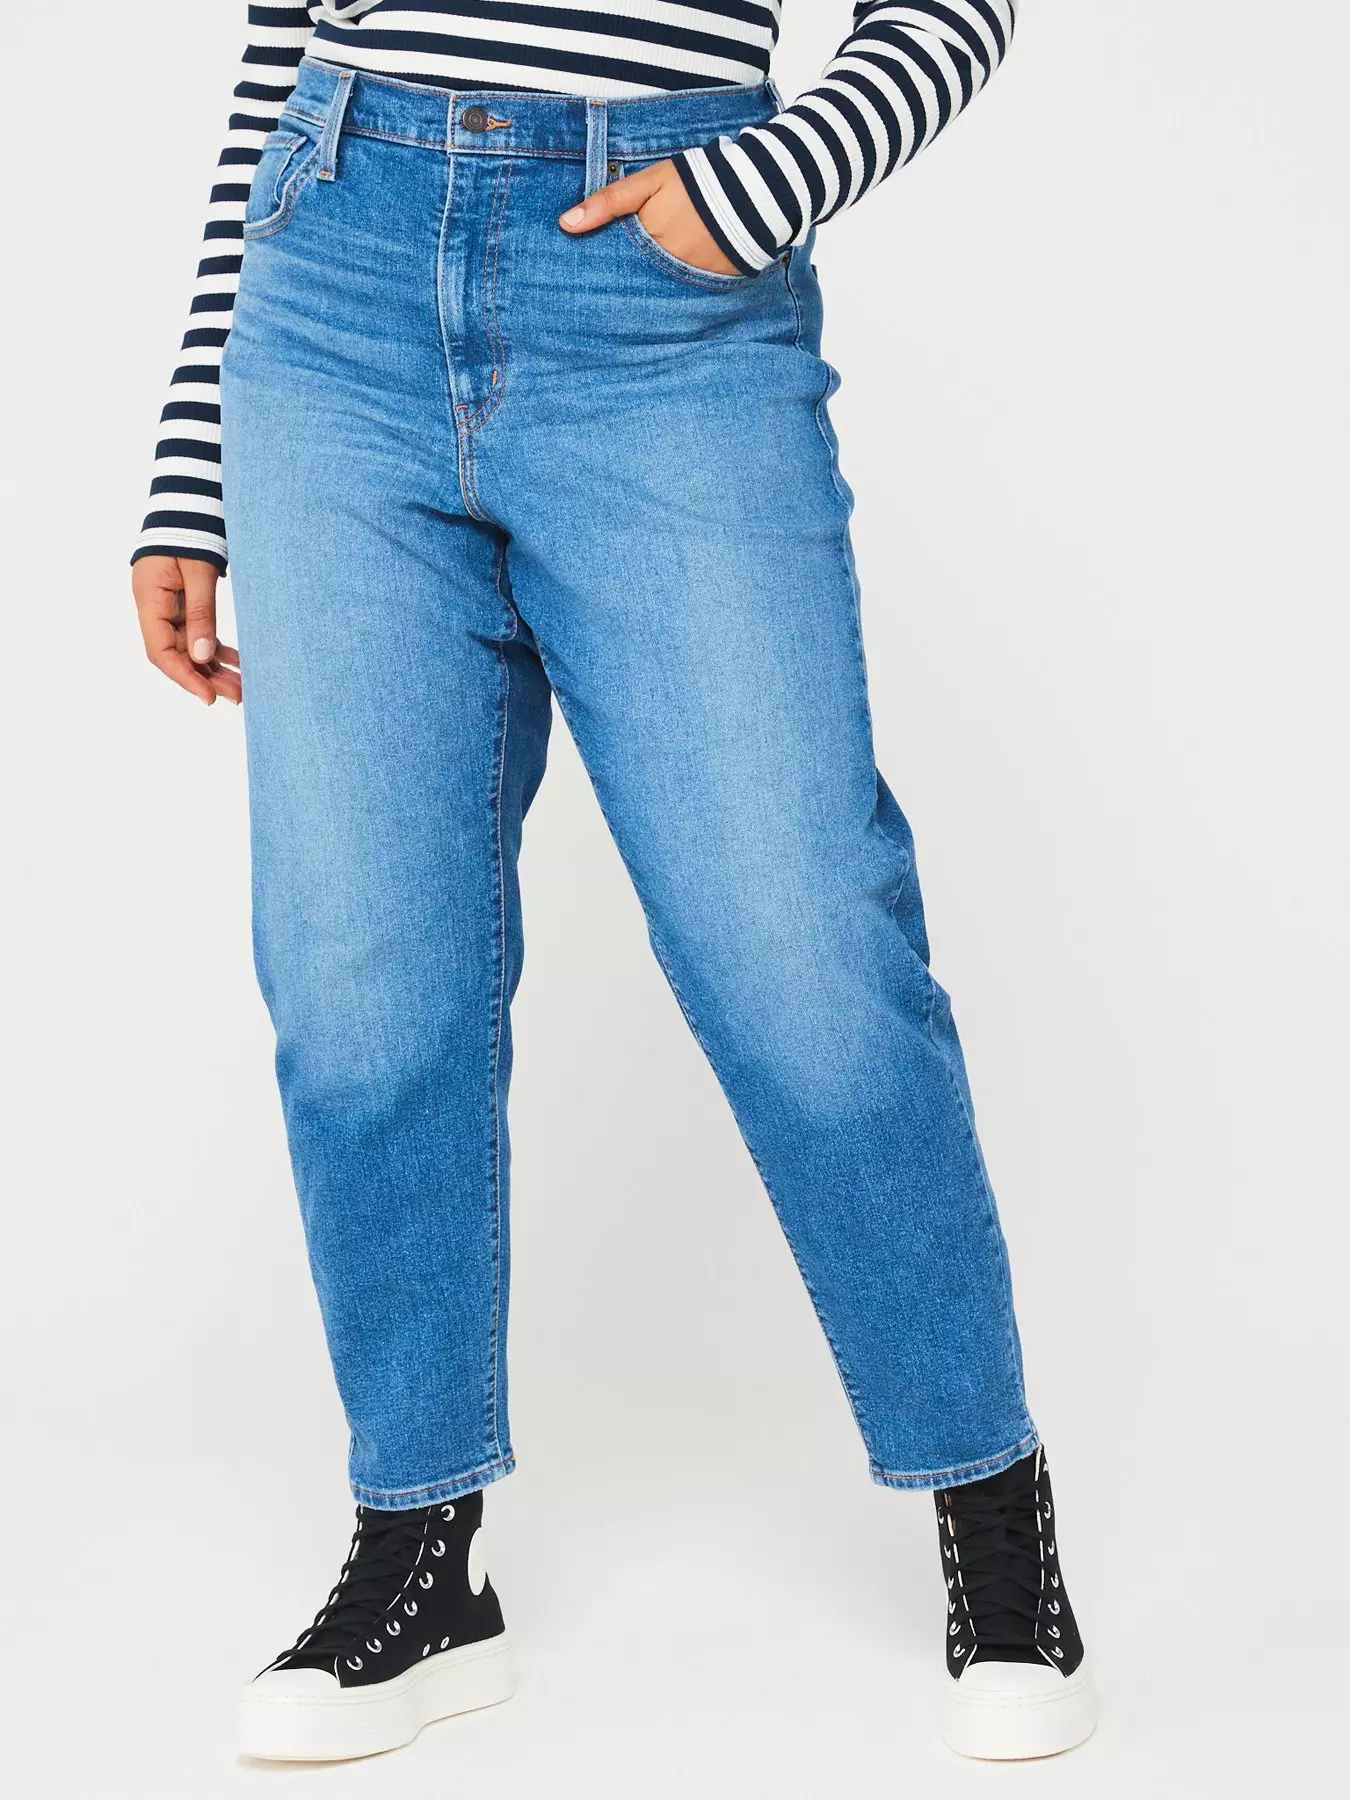 Levi's Trendy Plus Size Women's High-Waisted Mom Jeans - Macy's